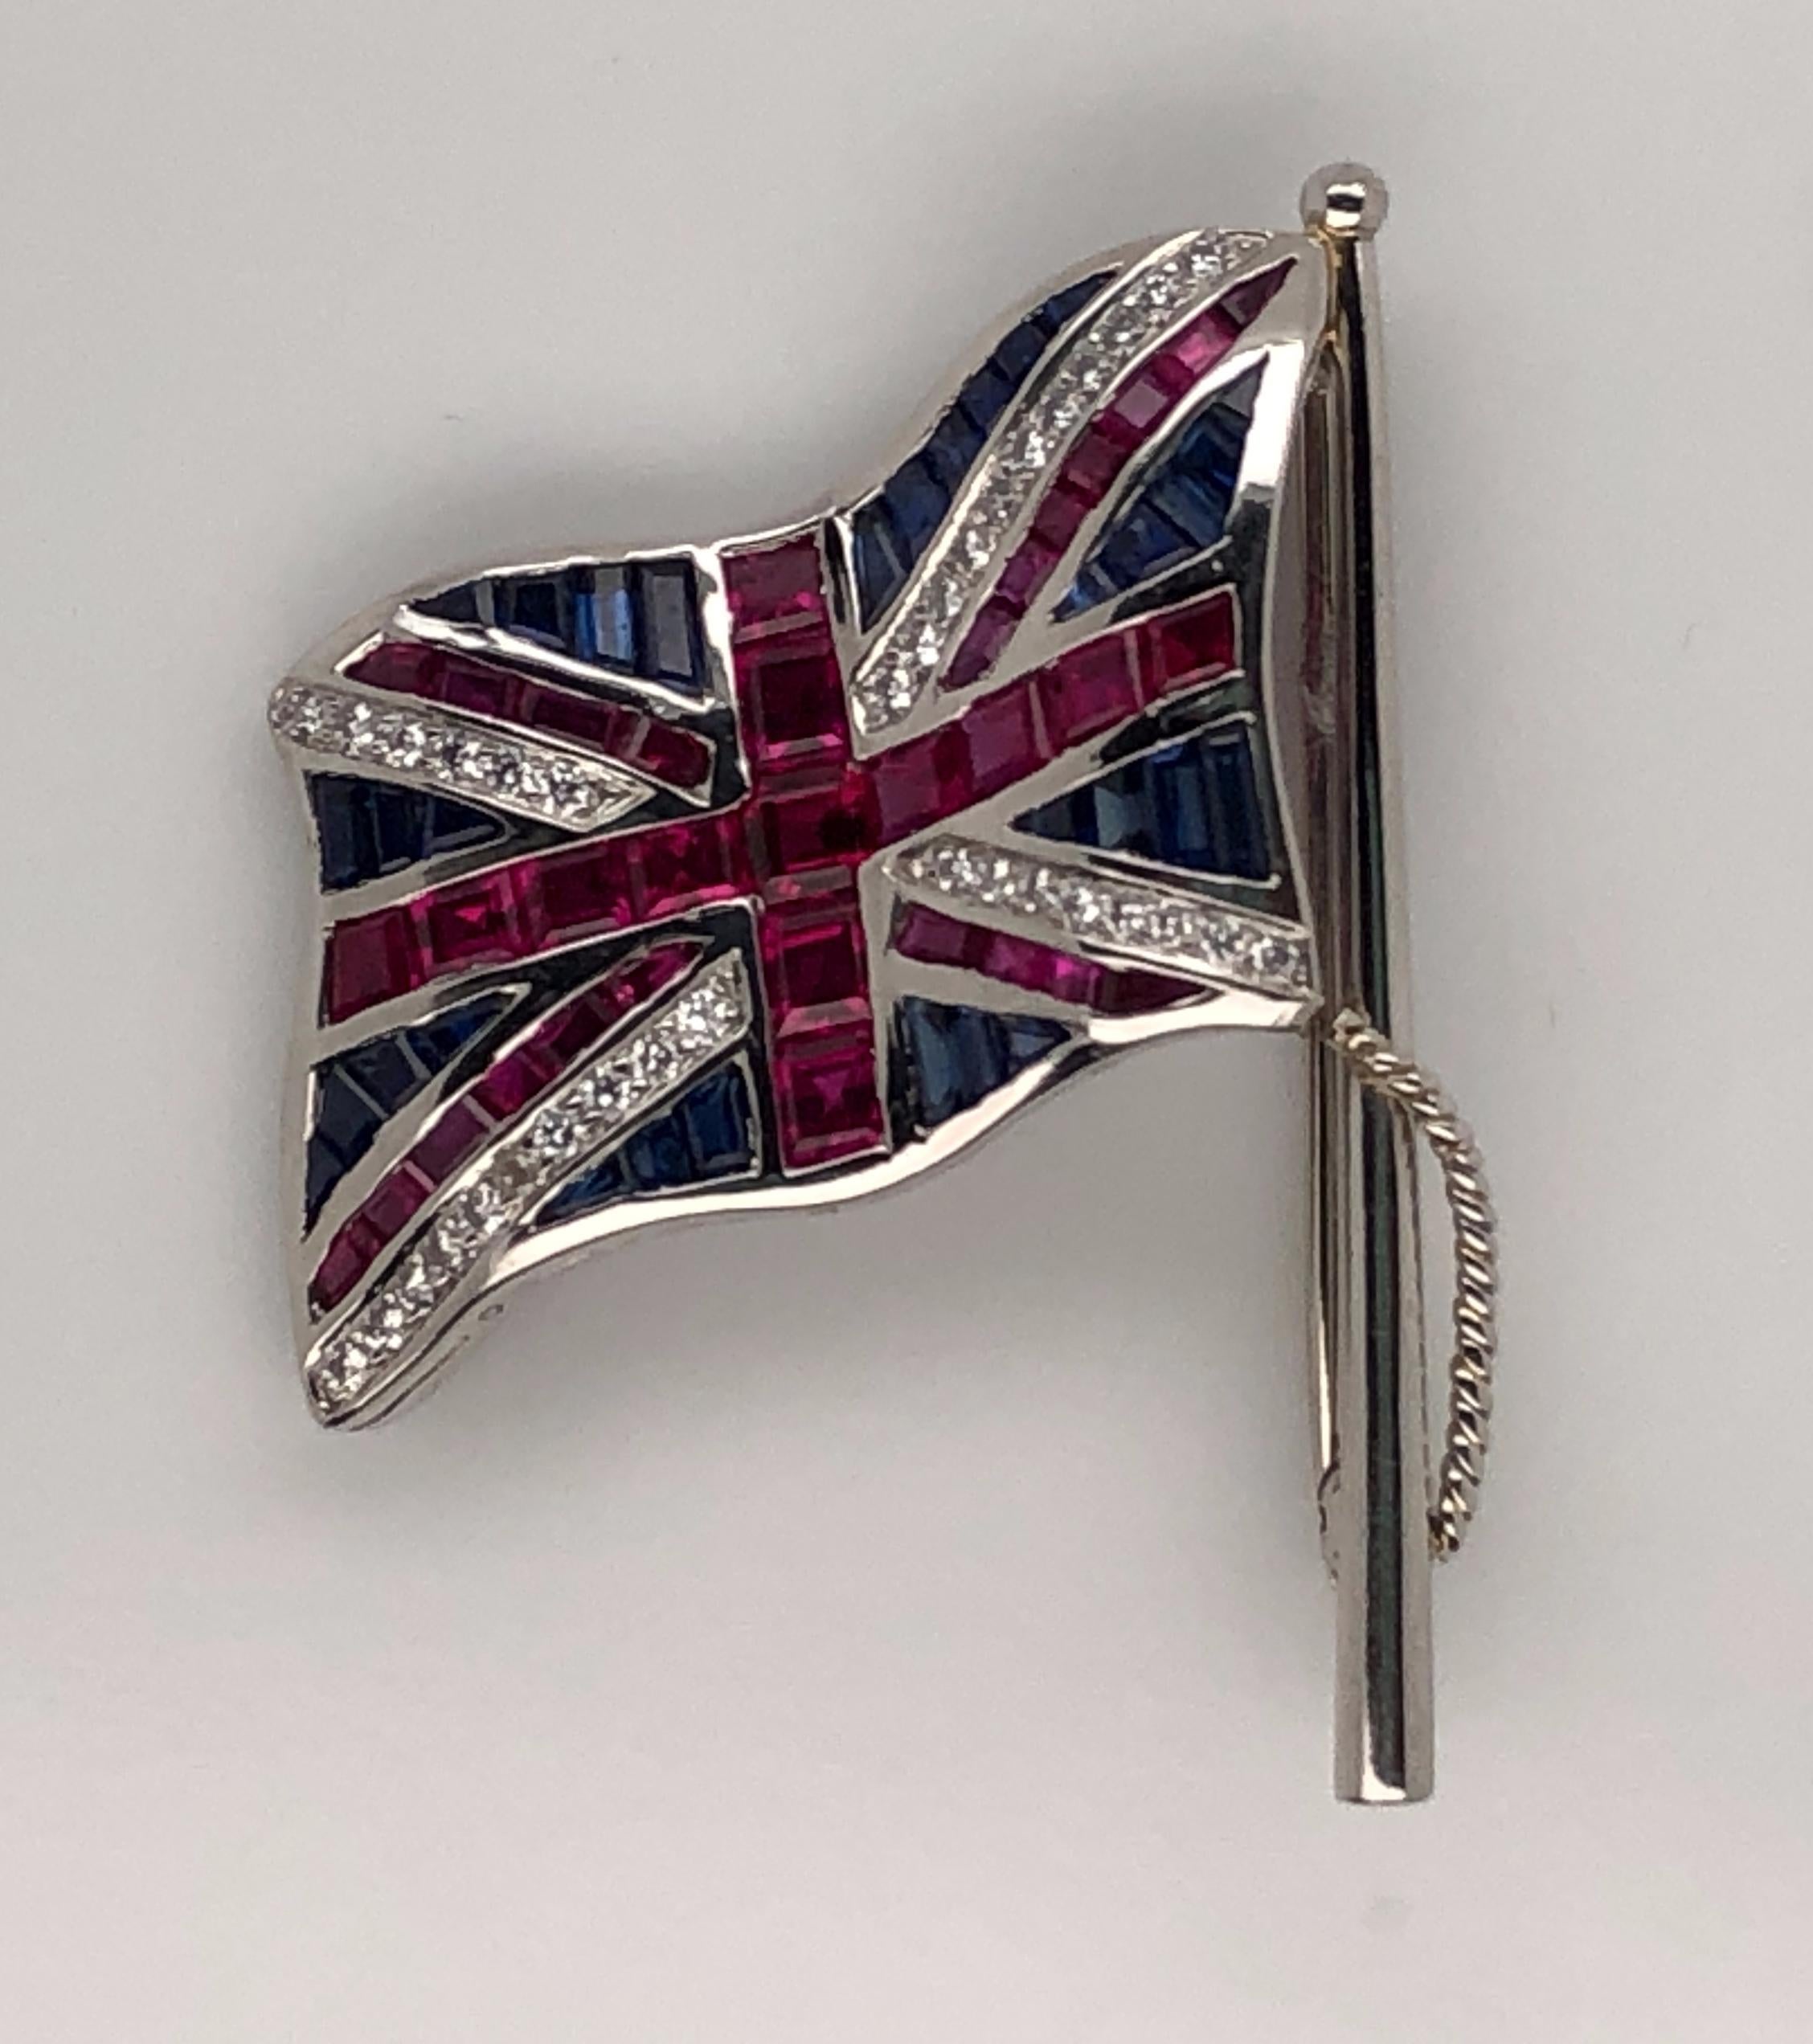 Oscar Heyman platinum Union Jack flag brooch contains rubies (2.63cts), sapphires (1.59cts) and diamonds (0.33cts). It is stamped with the makers mark, IRID PLAT, and serial number 200826.

Flag pole is 38mm in length, flag measures 25mm x